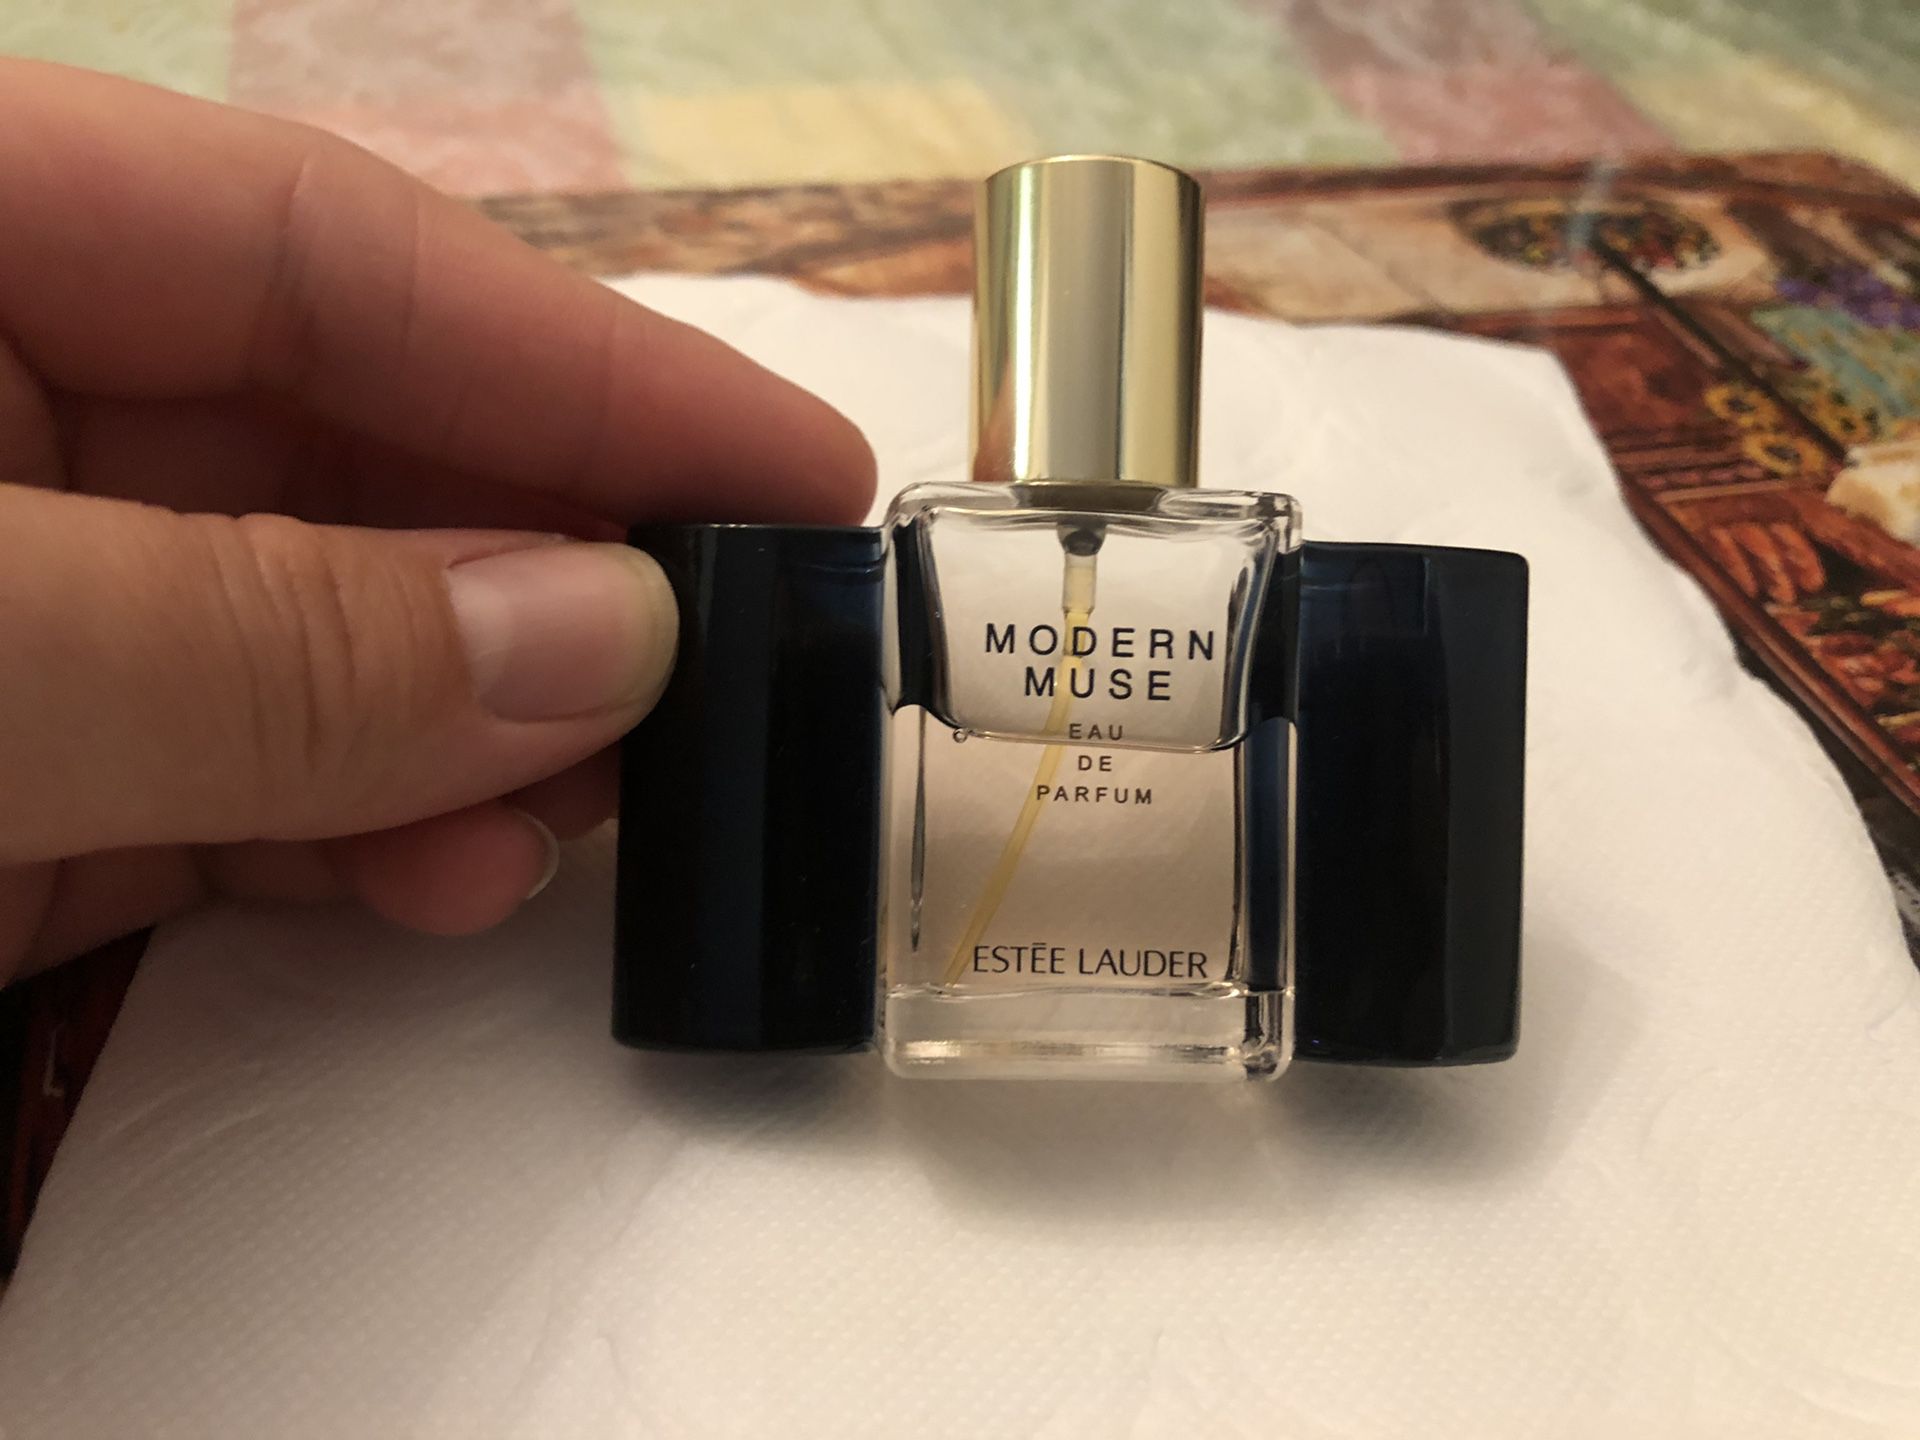 Modern muse perfume almost 75% full